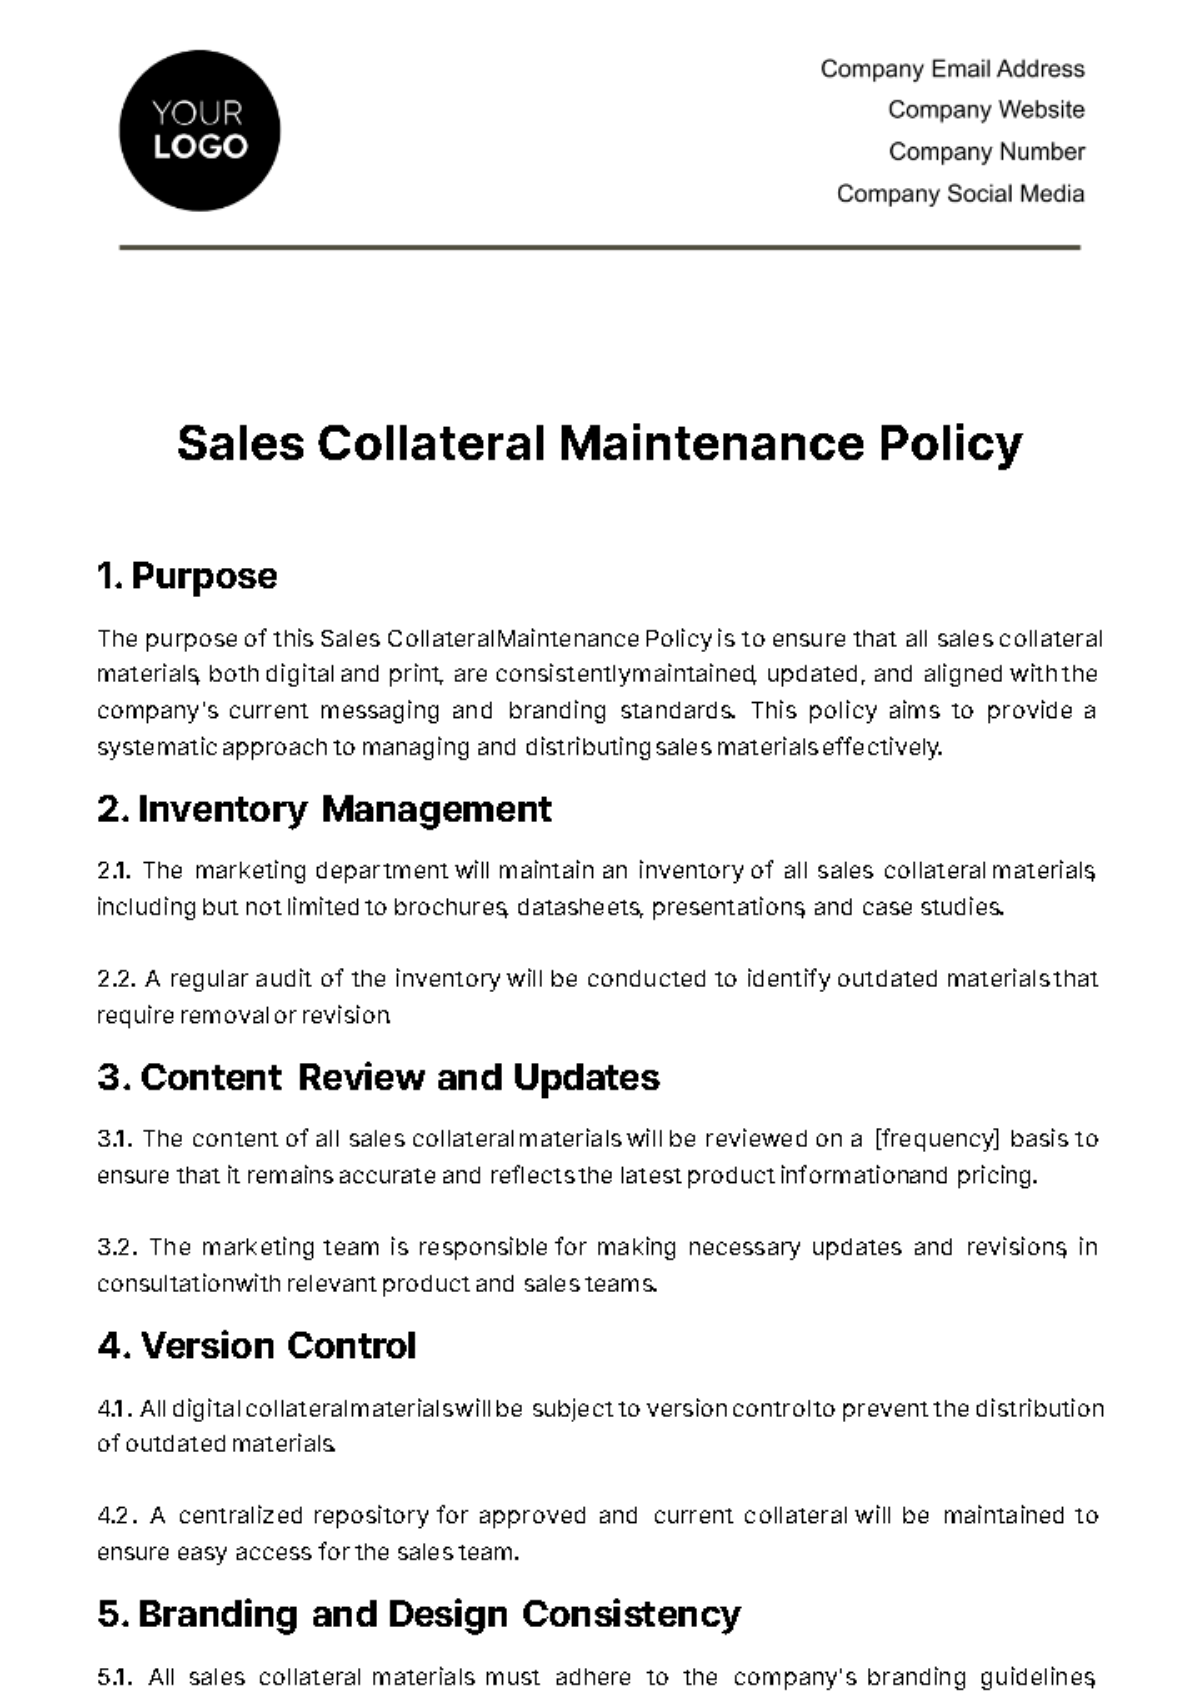 Free Sales Collateral Maintenance Policy Template